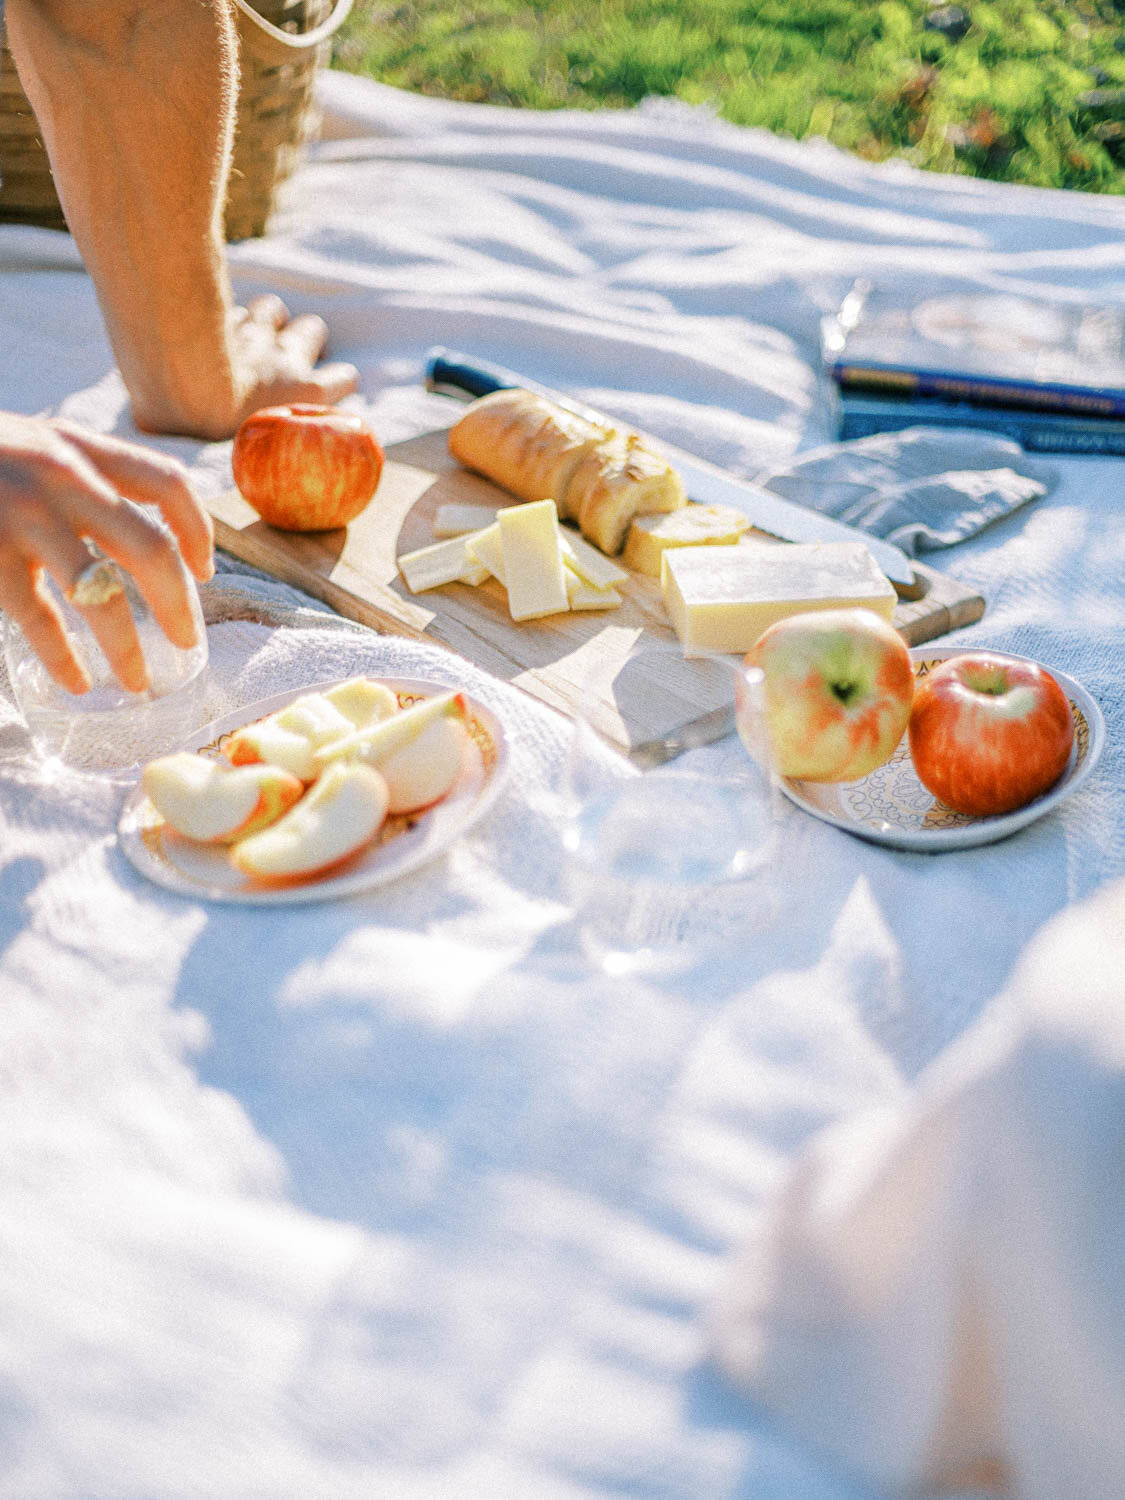 cheese-and-baquette-on-olive-wood-board-during-fall-picnic-in-virginia.jpg